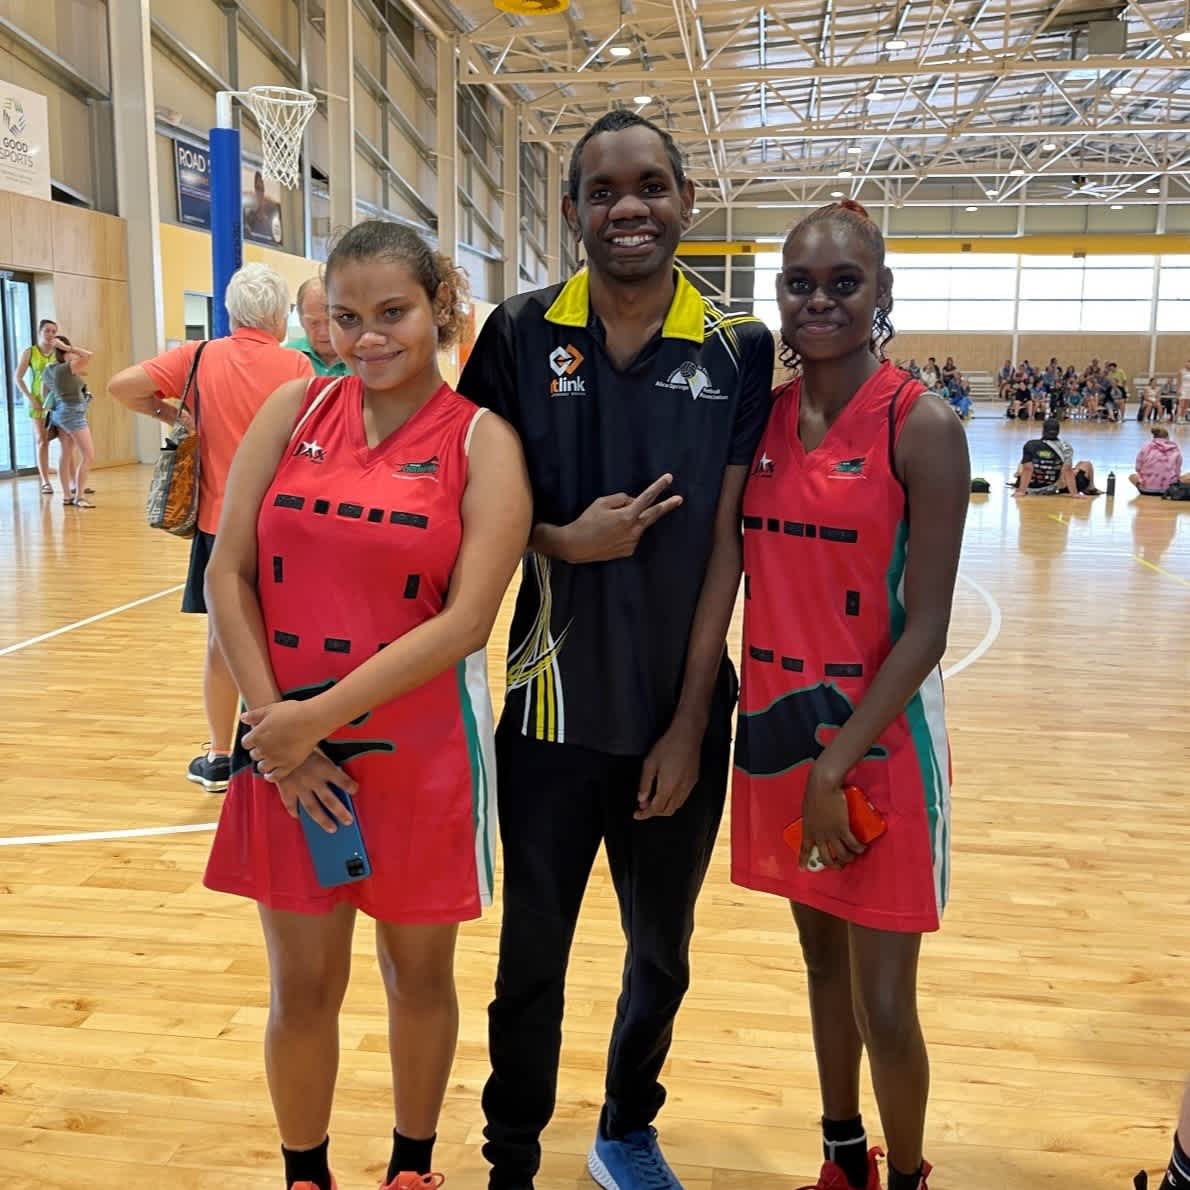 Micky standing with two female teammates on the netball court.